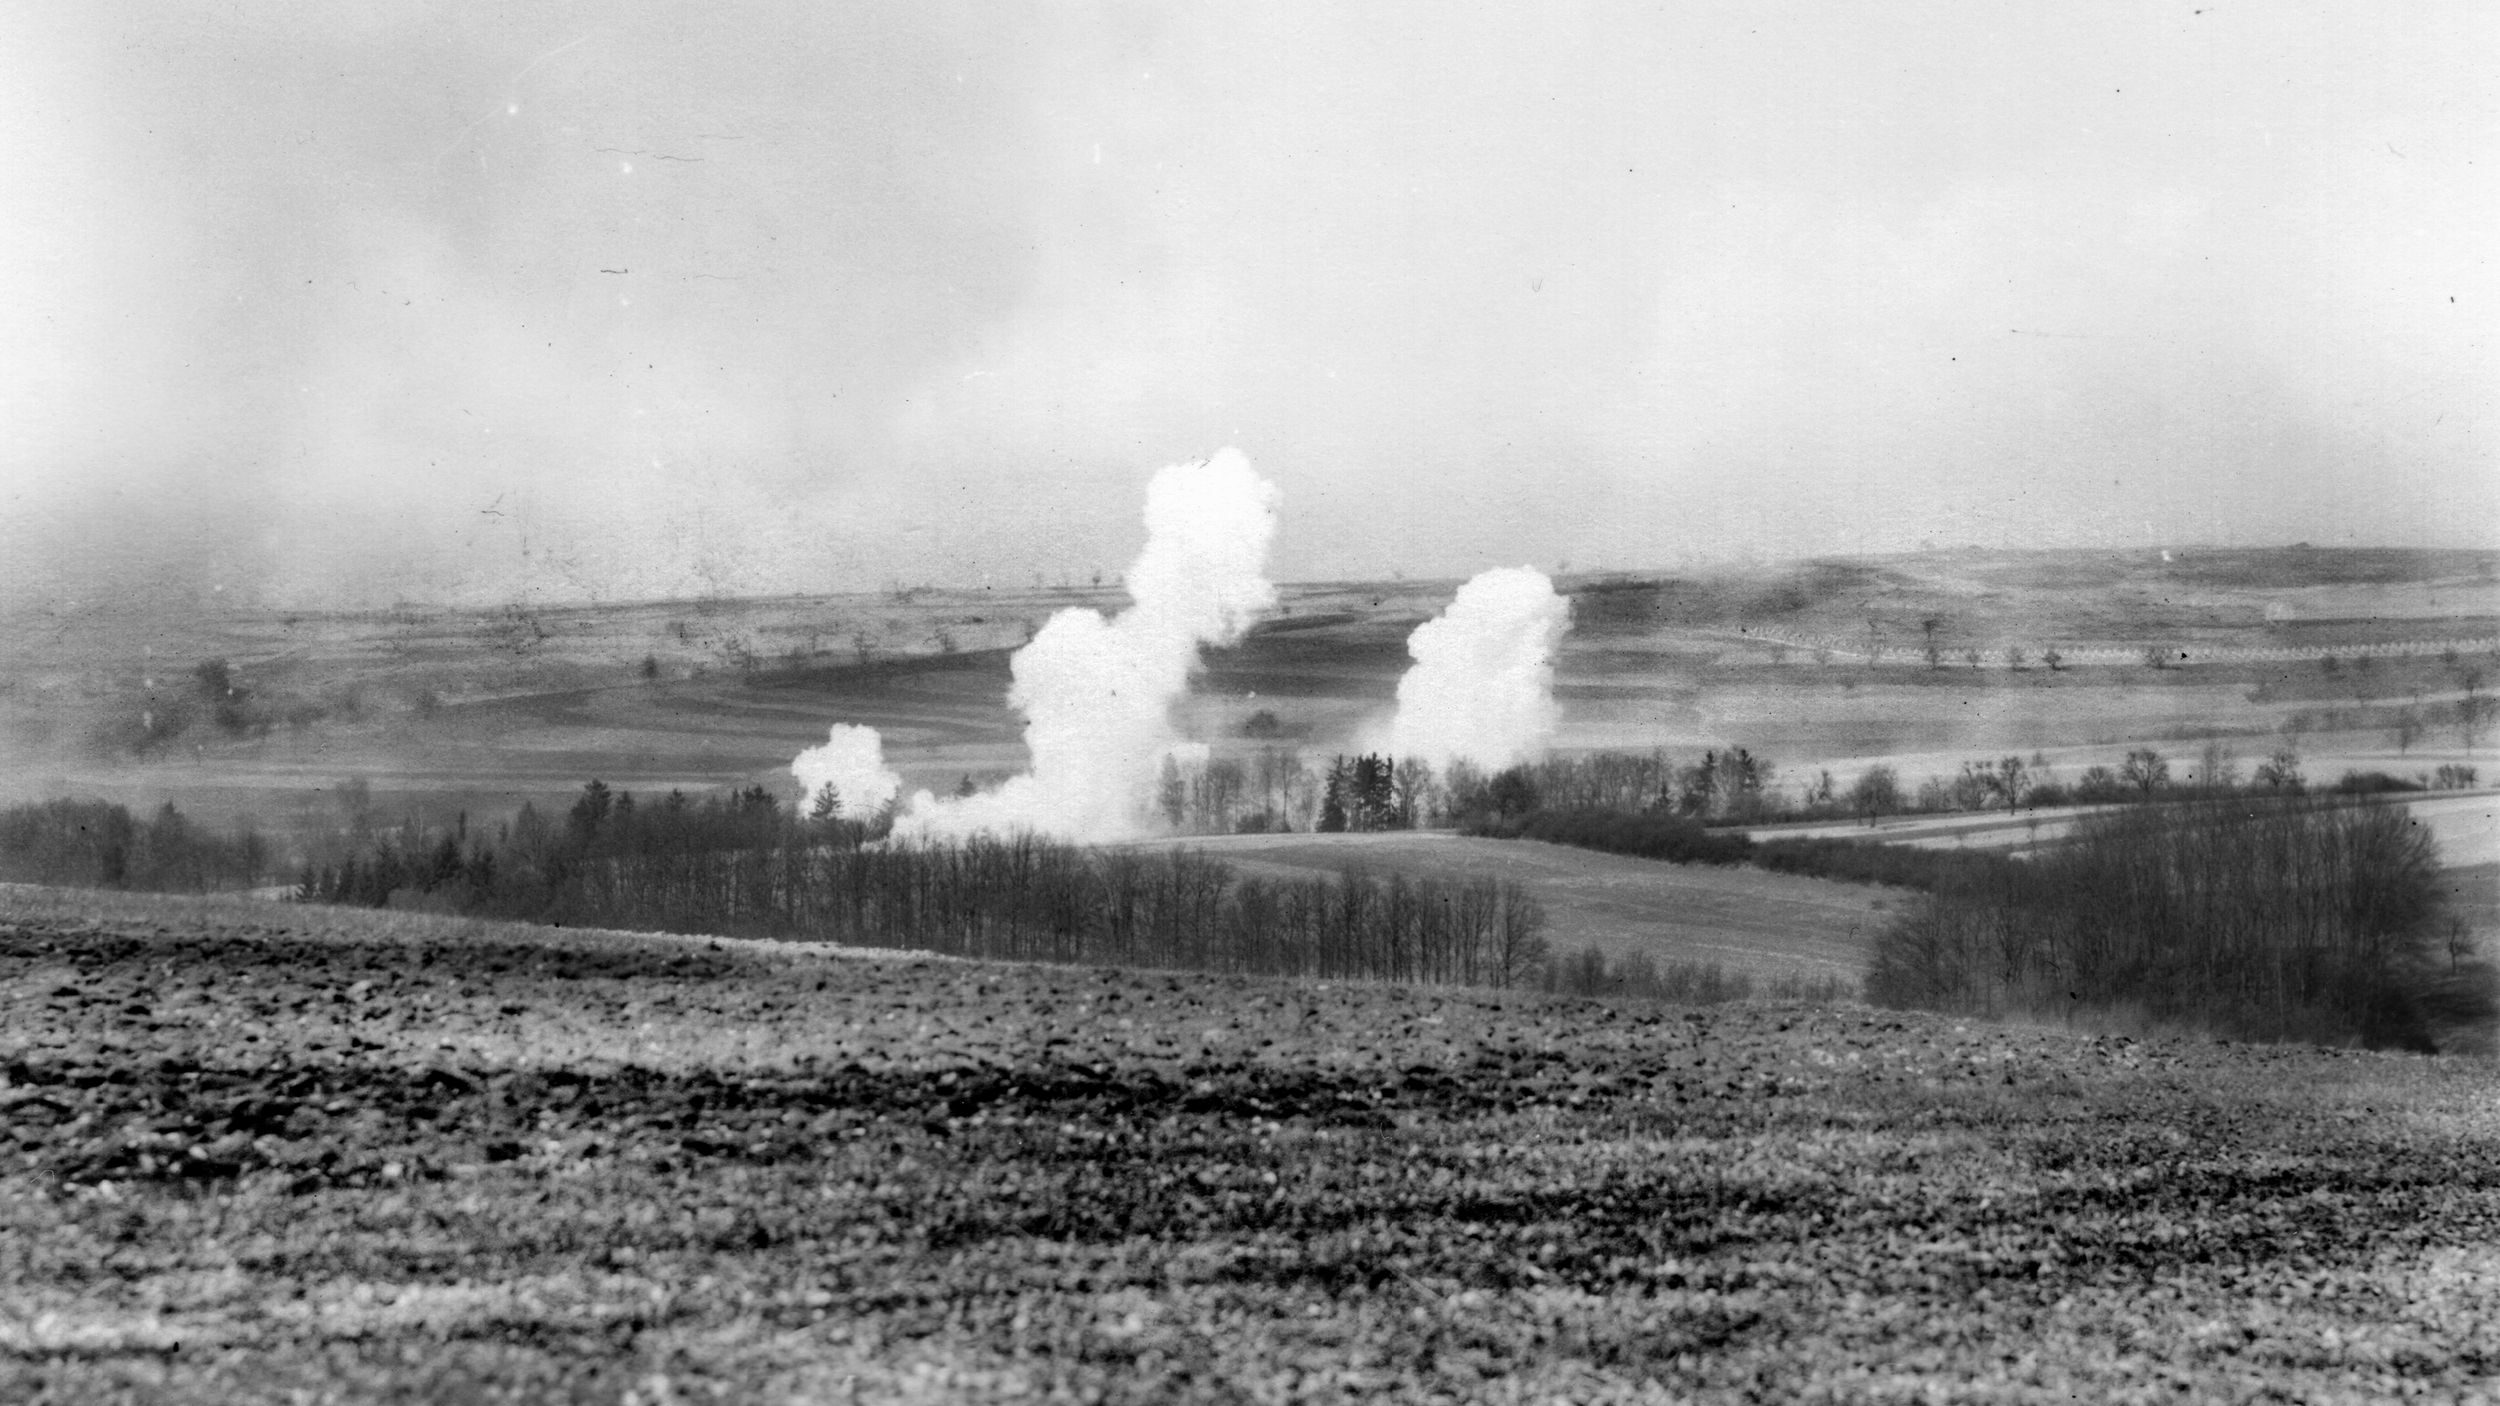 American artillery sets up a smokescreen prior to an assault against enemy-held positions near Zweibrücken. A line of dragon’s teeth obstacles (circled) is visible in the distance. 